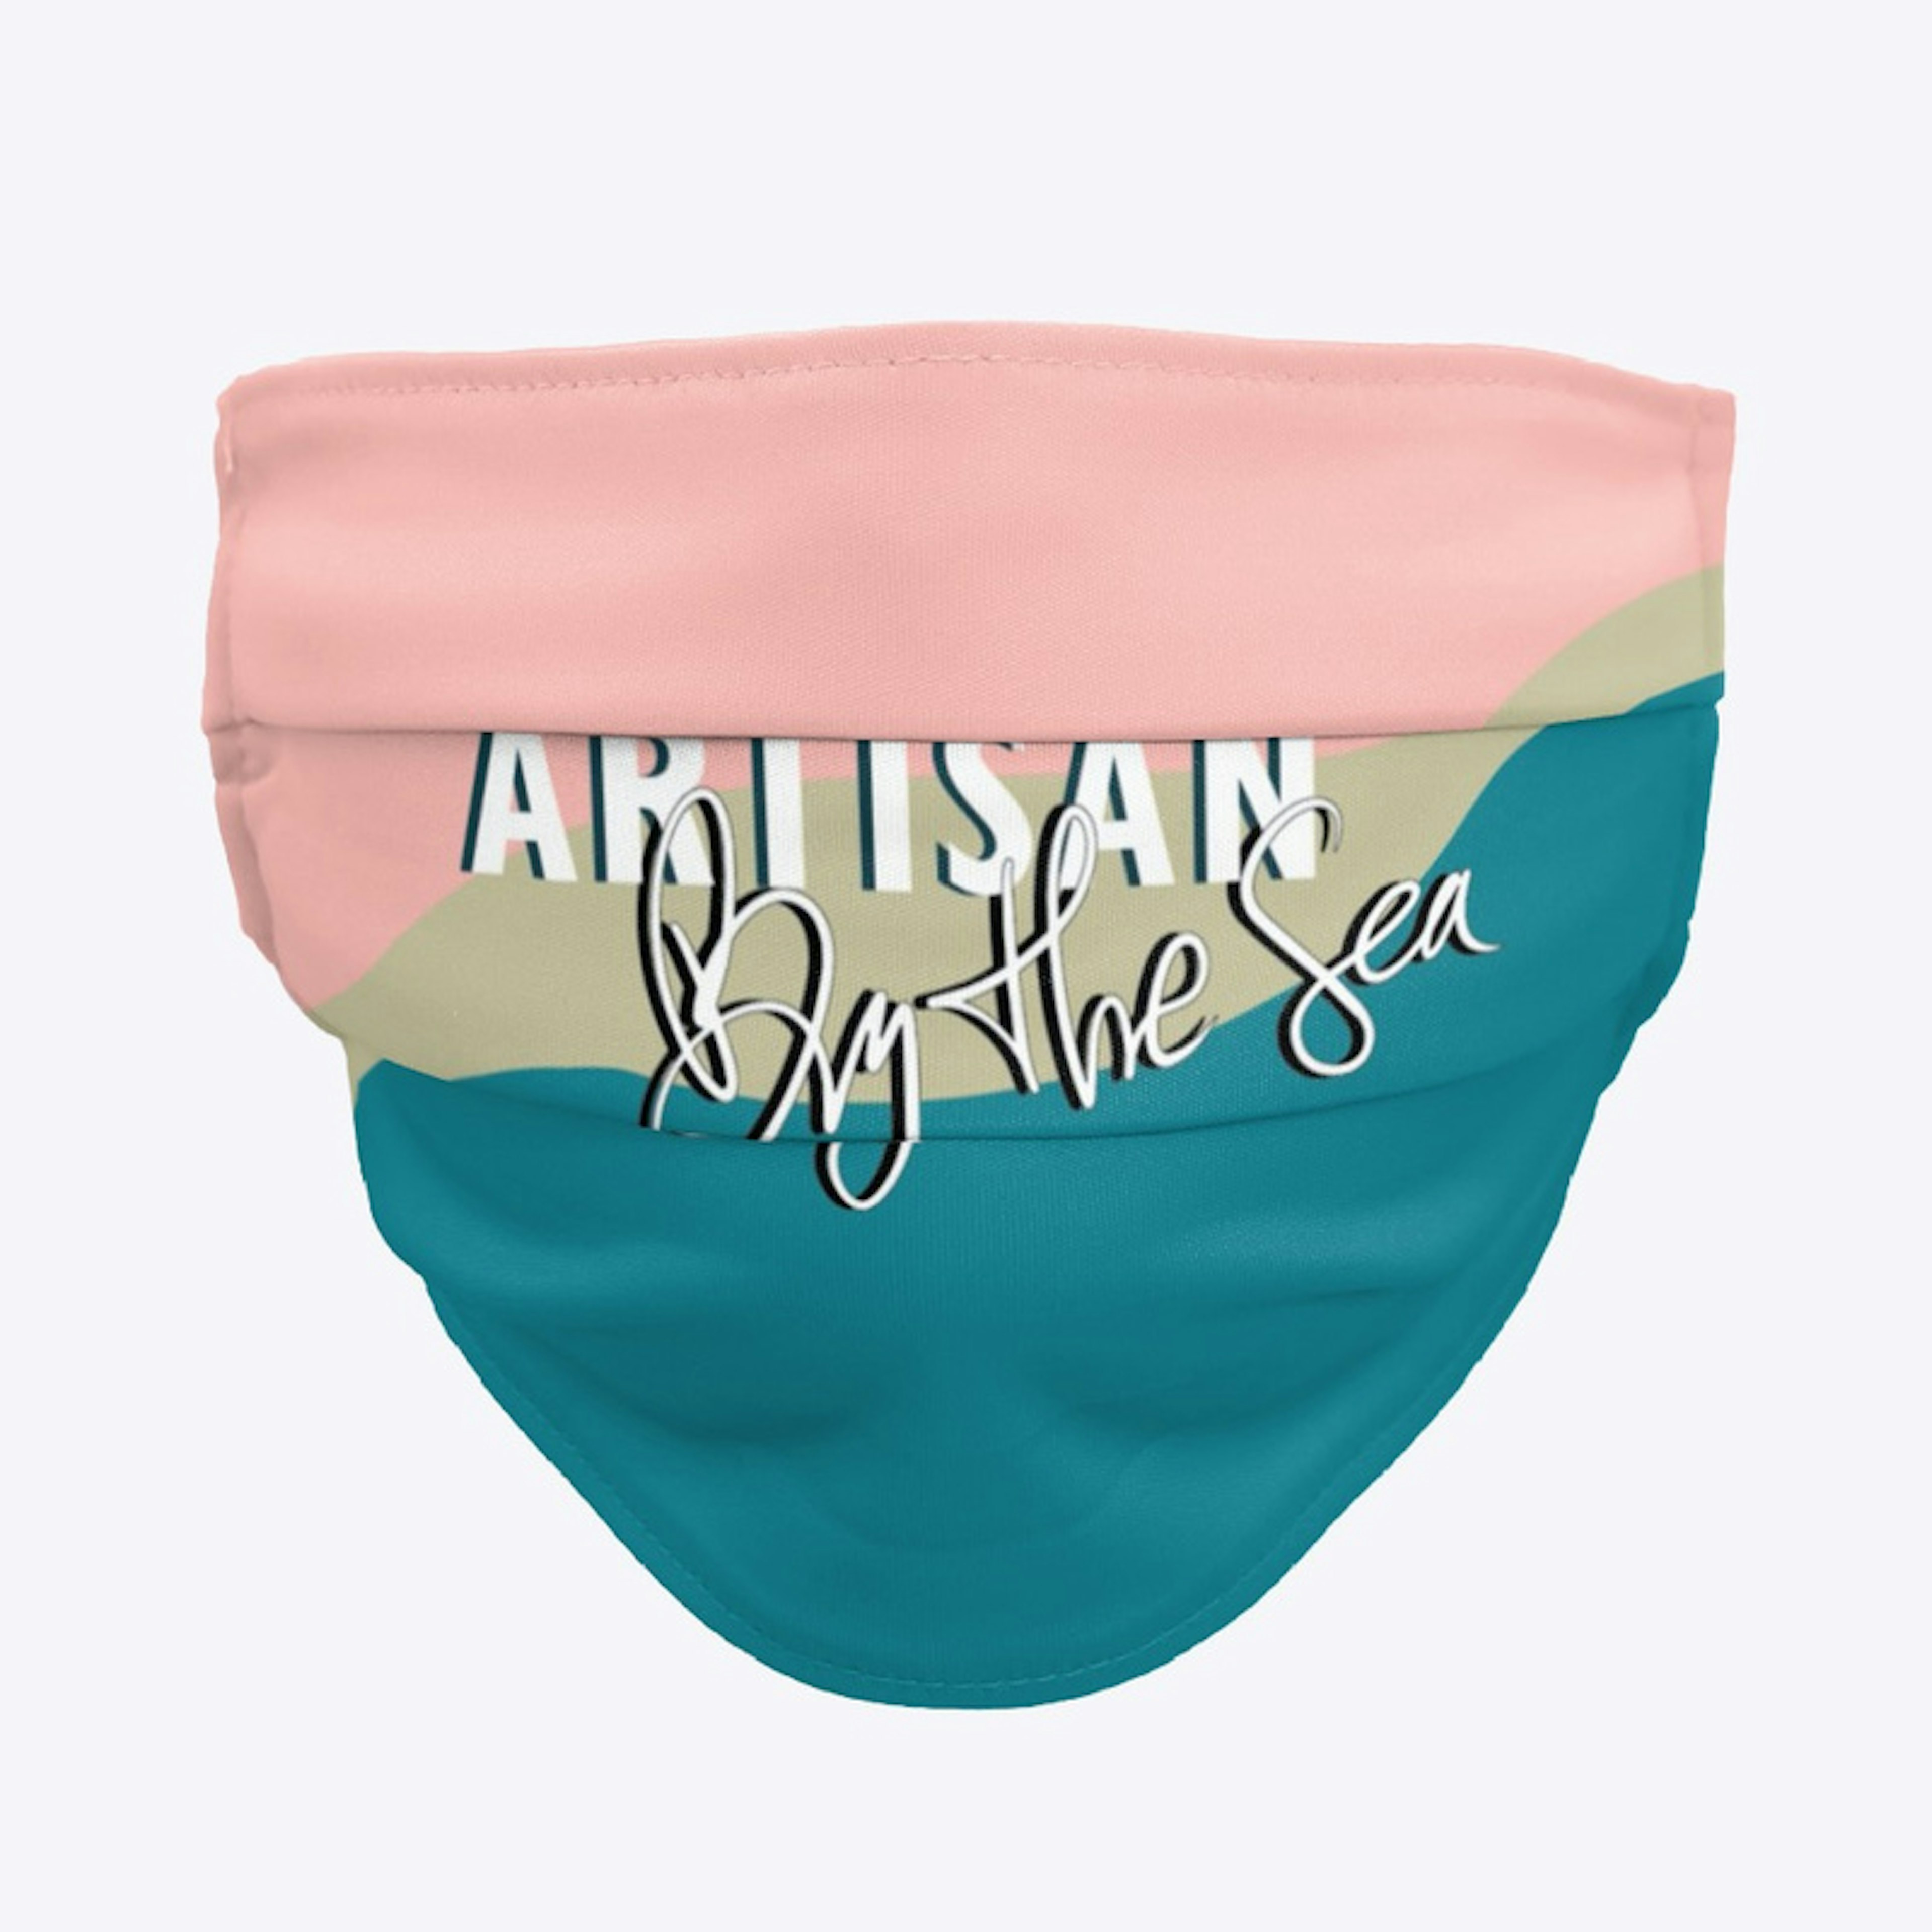 Artisan By The Sea Collection